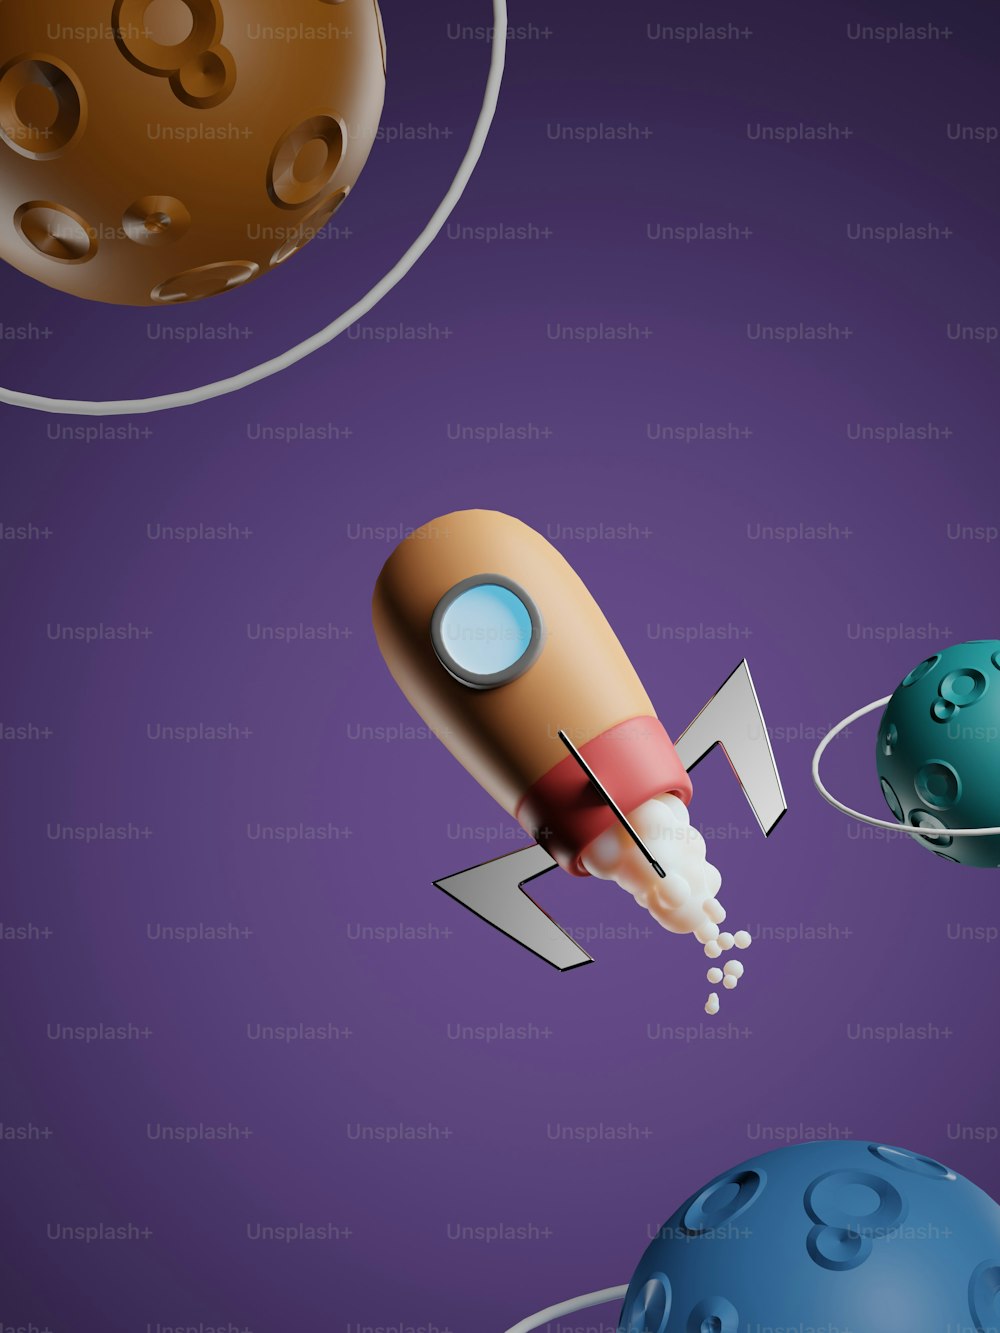 a rocket launching into space with other planets around it